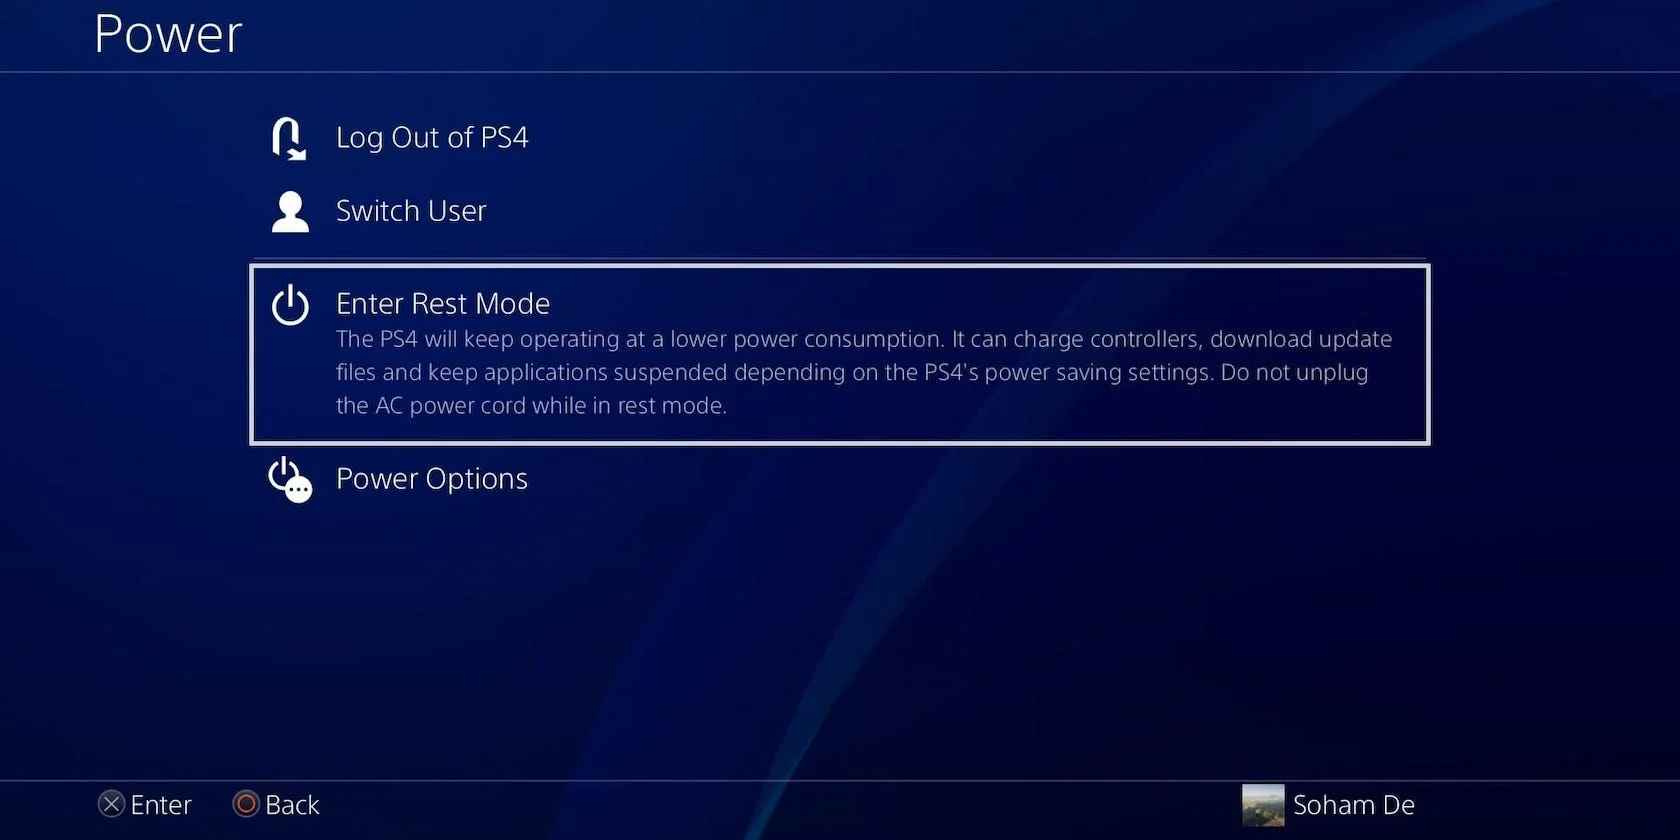 Power options to restart PS4